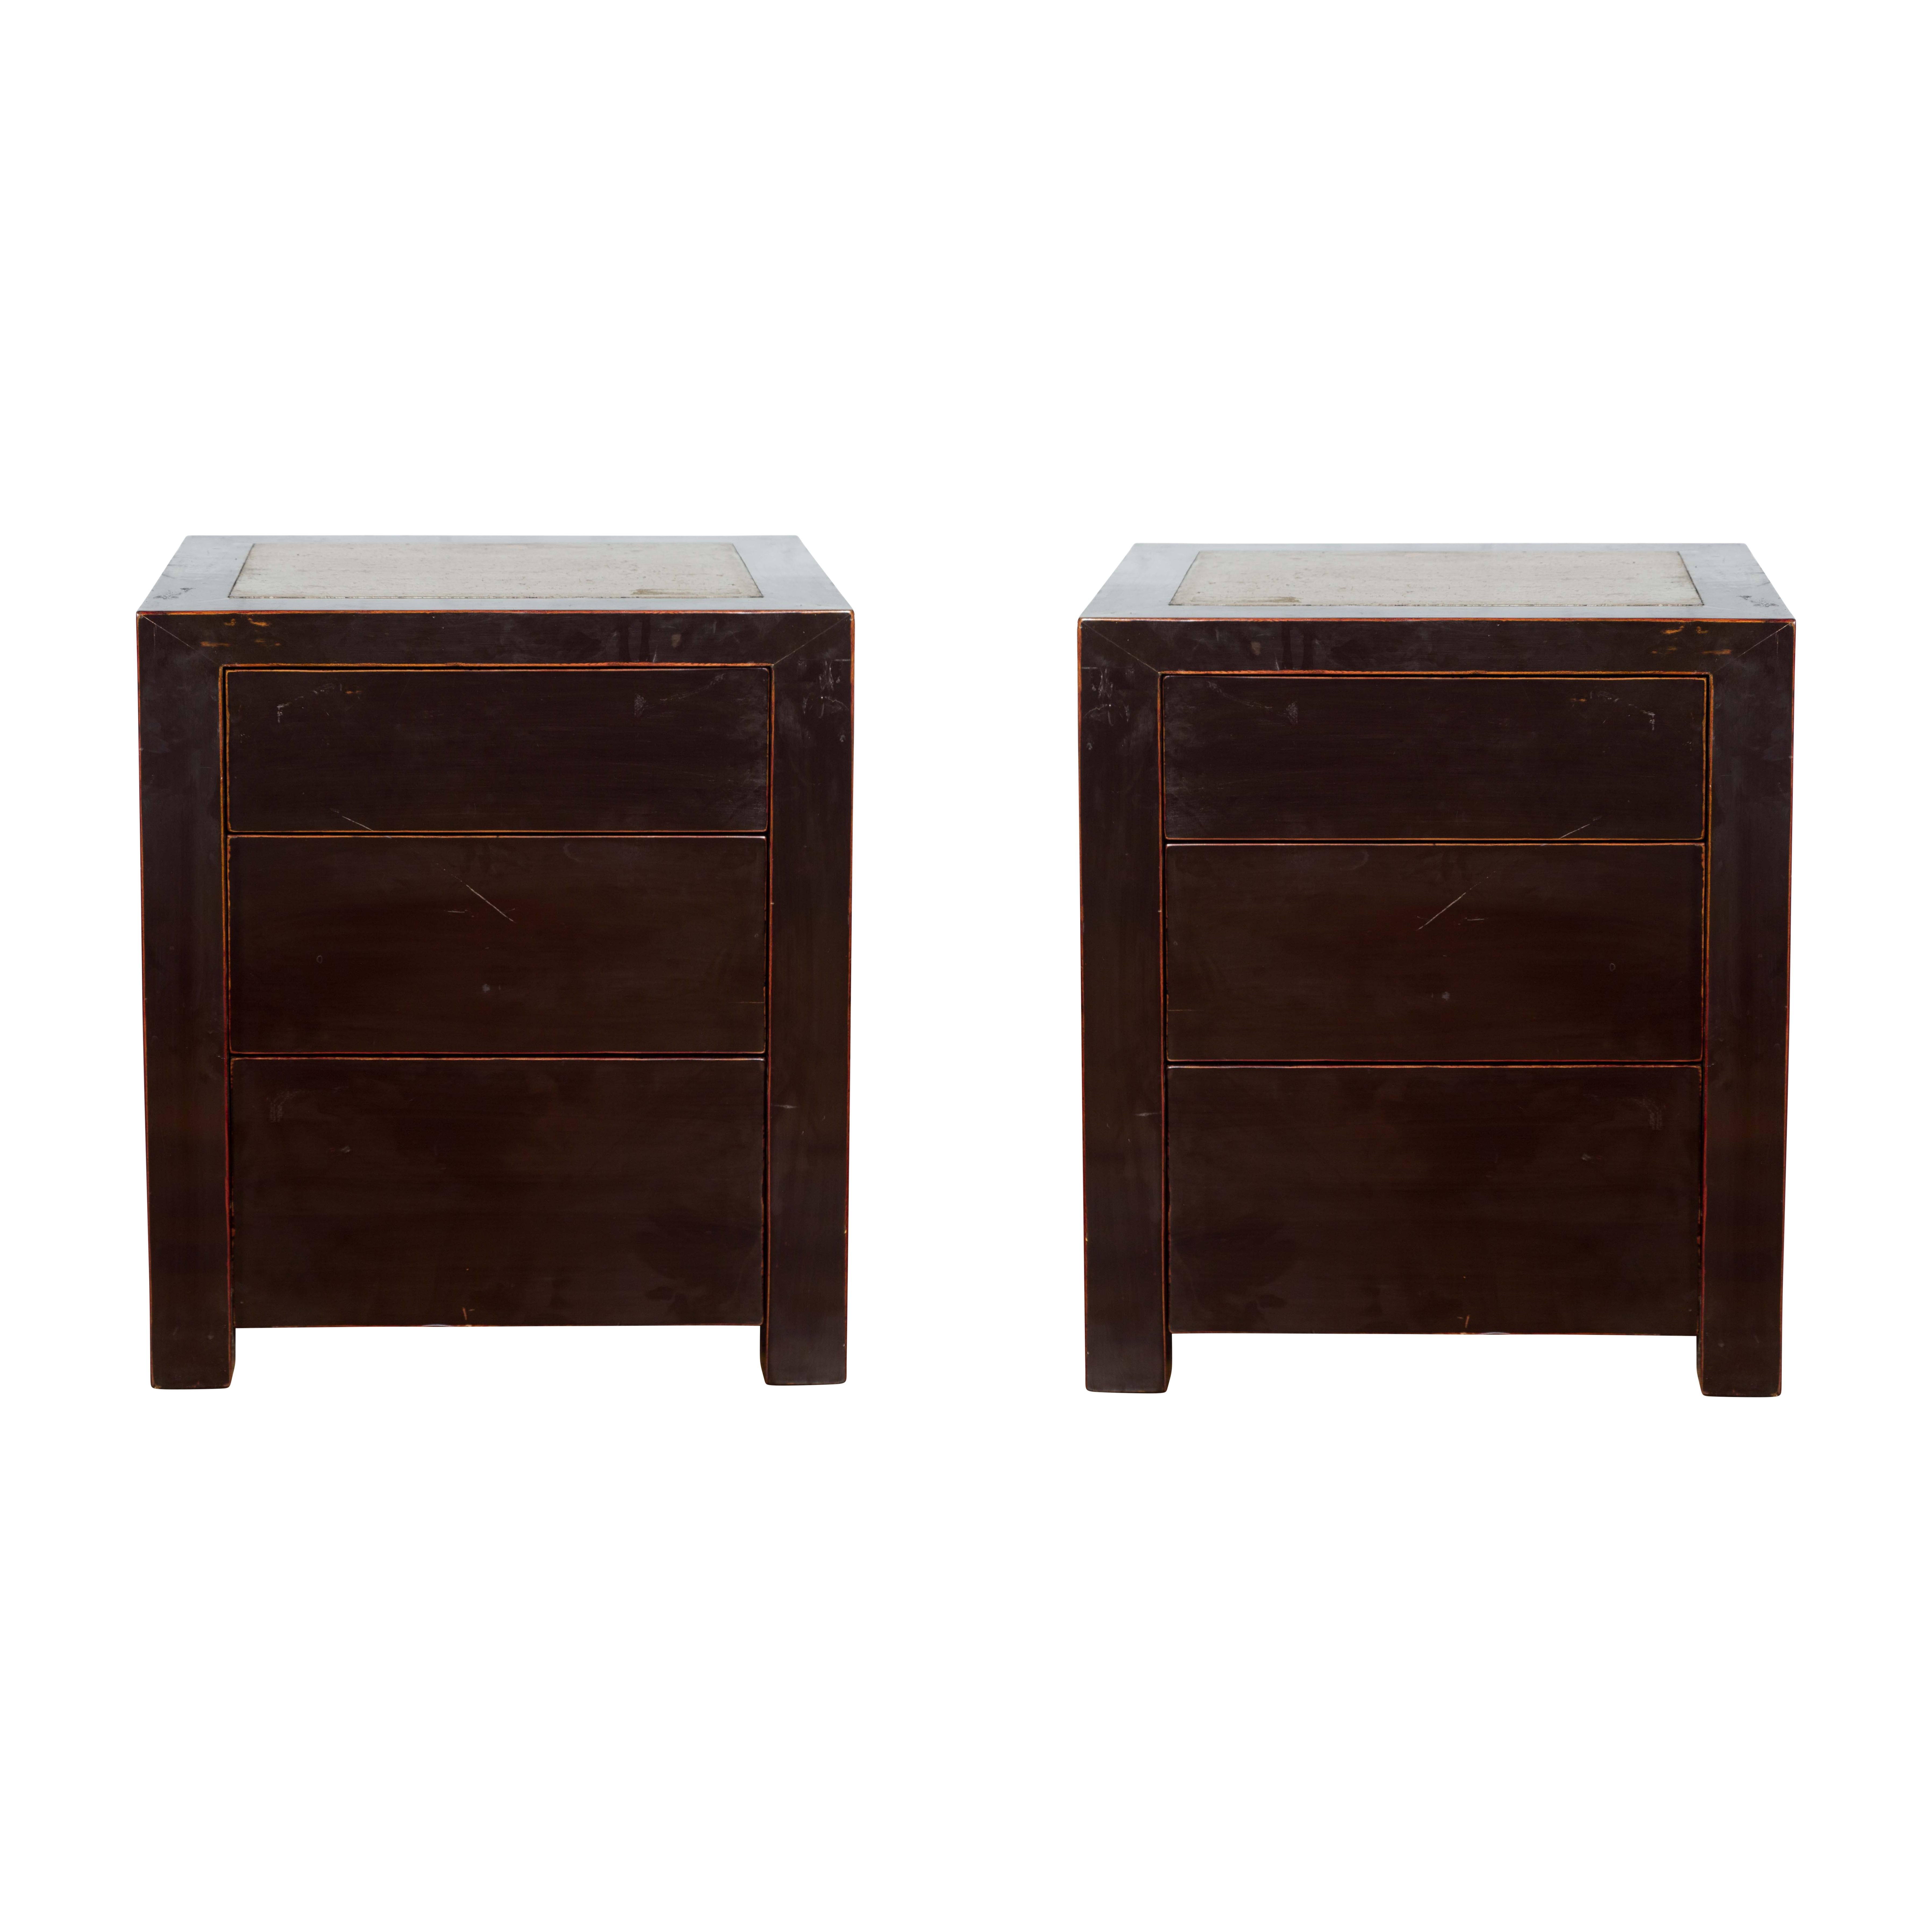 Pair of Antique Chinese Black Lacquer Bedside Cabinets with Ming Dynasty Tops